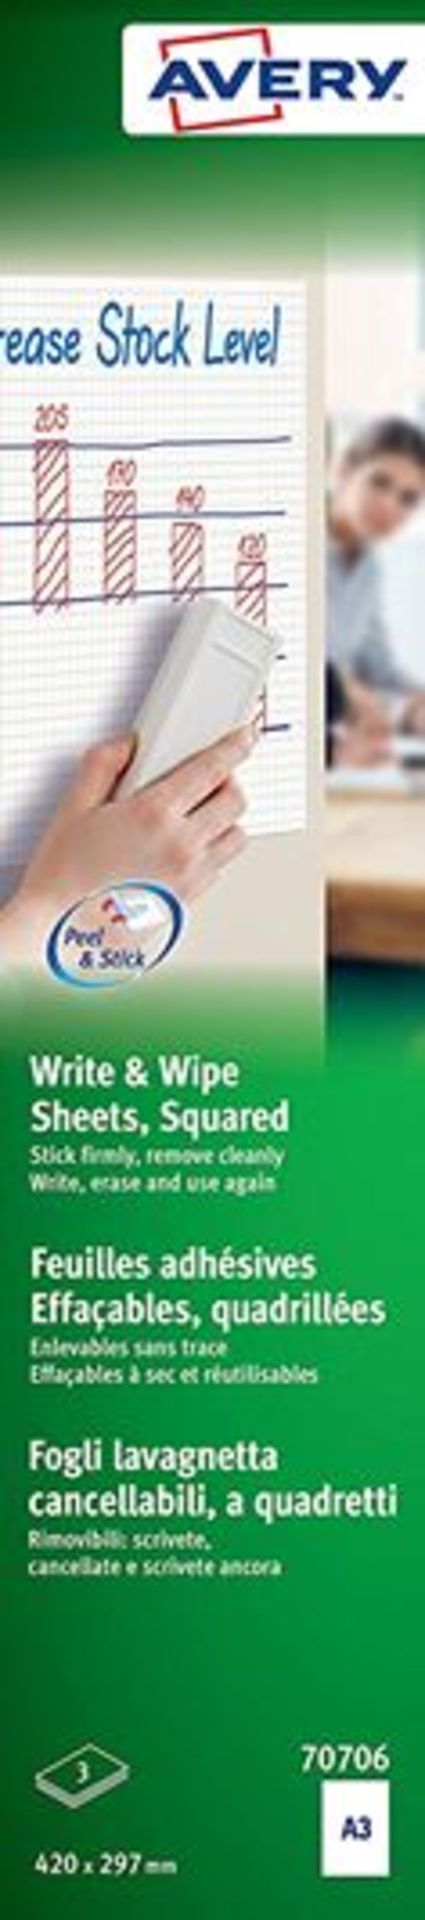 225 Items Avery Write & Wipe Sheets, 4 Types Rrp Over £2500